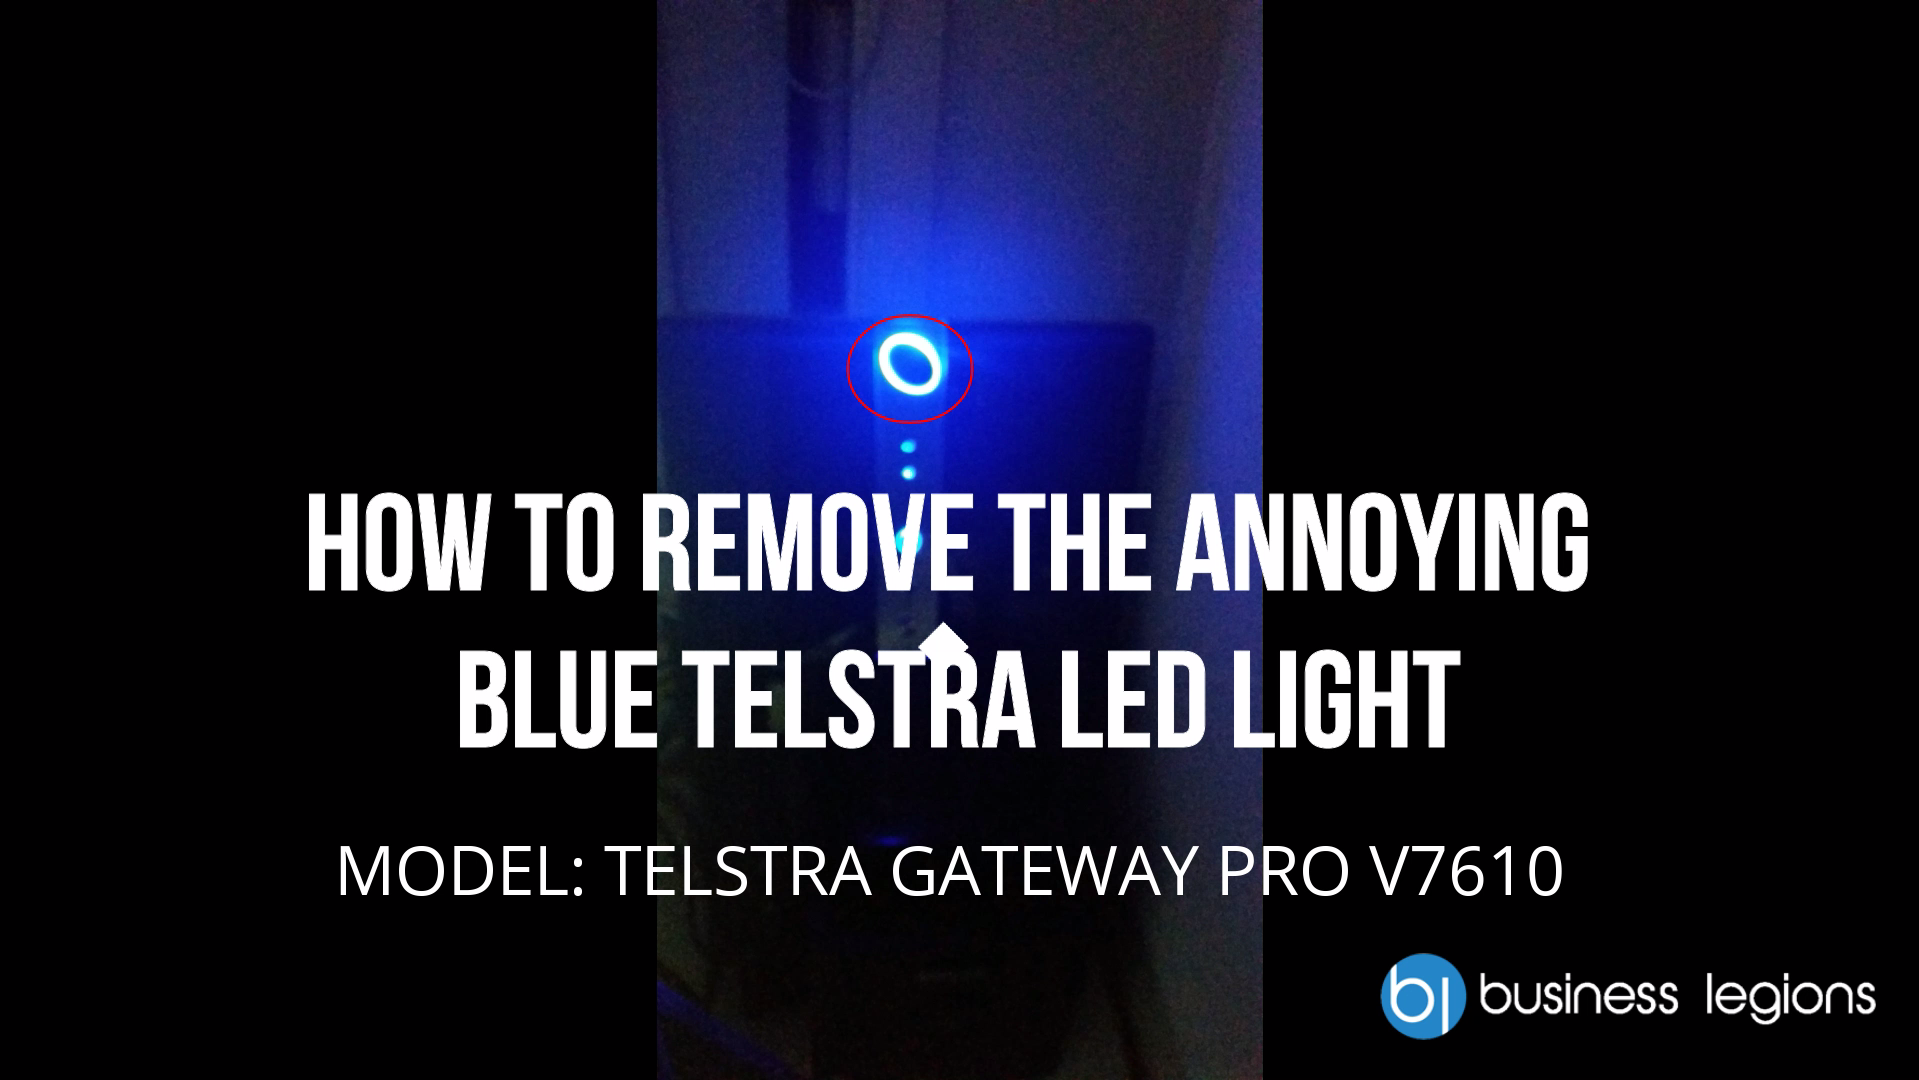 Business Legions - How to remove the annoying blue telstra led light